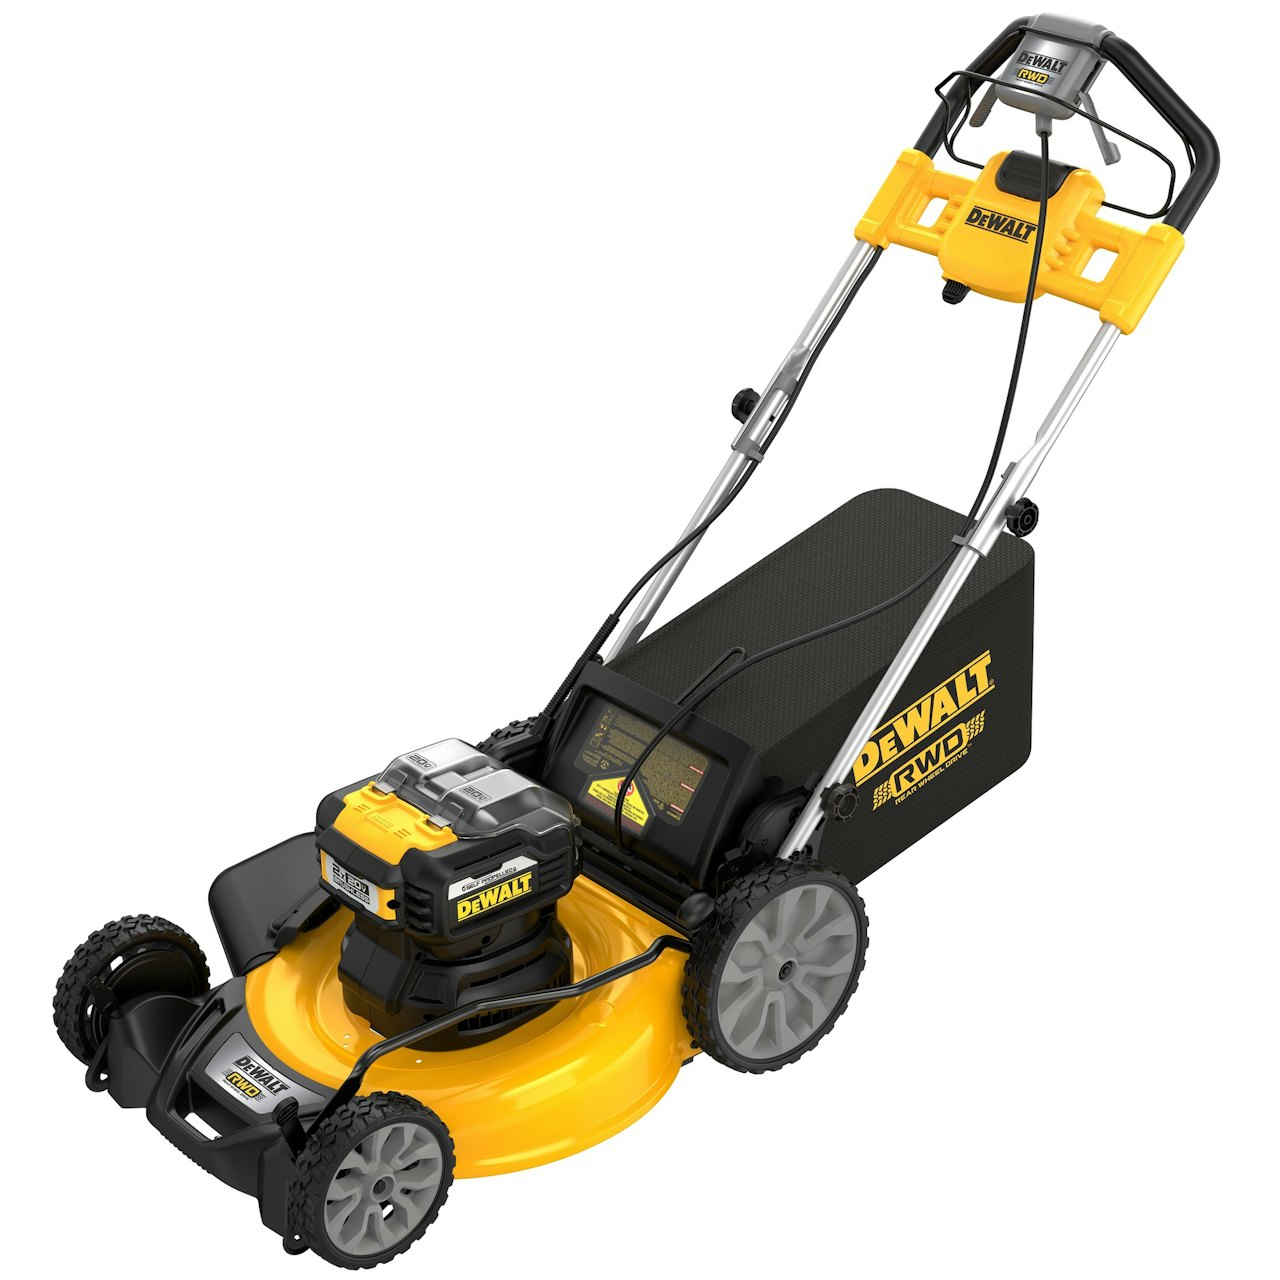 DeWALT Introduces Several New Outdoor Battery Powered Products at 